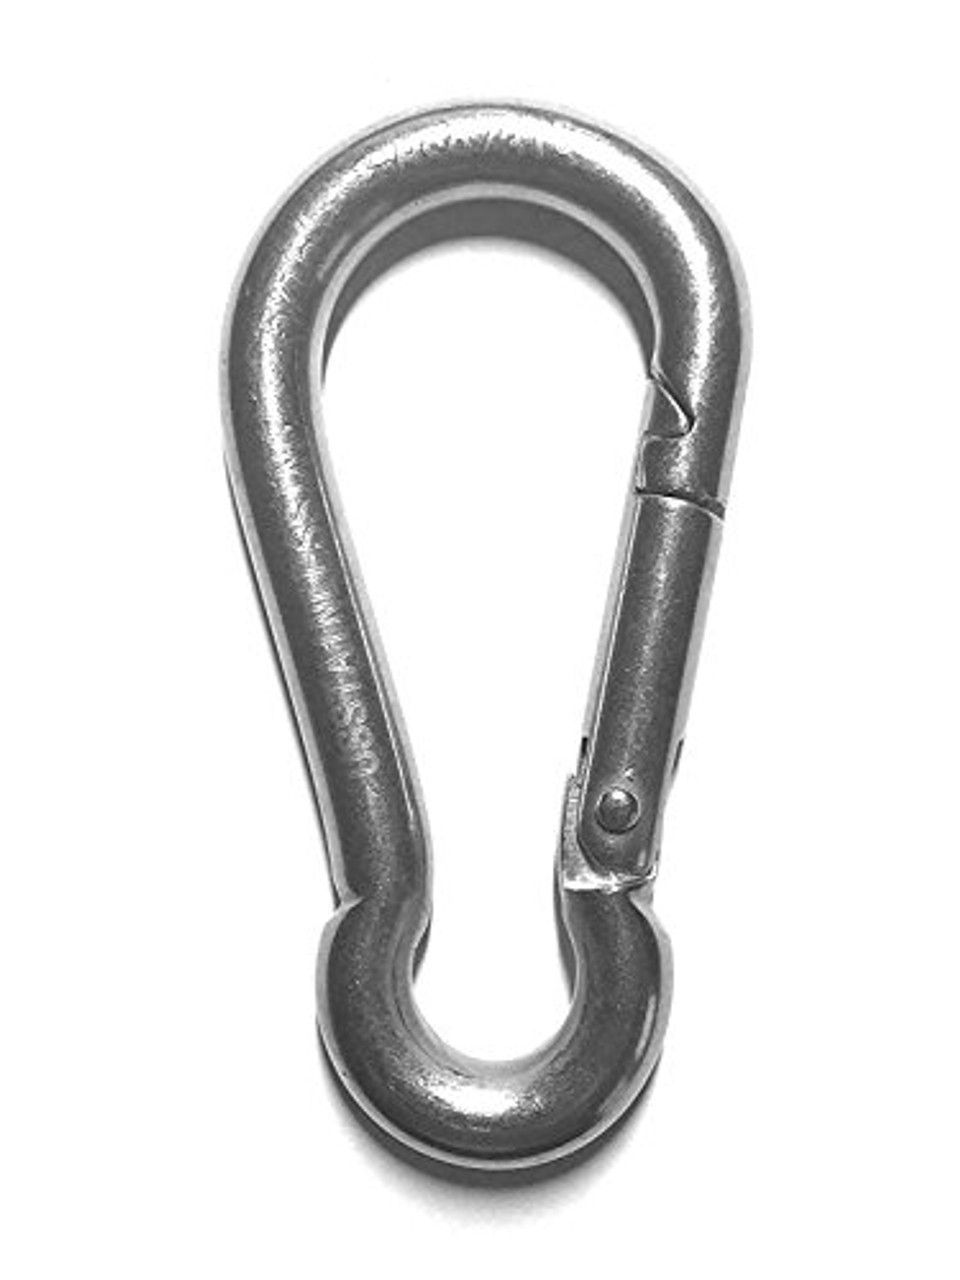 2 Pieces Stainless Steel 316 Asymmetrical Spring Hook Carabiner Casting End  with Eye 1/4 (6mm) Marine Grade - US Stainless